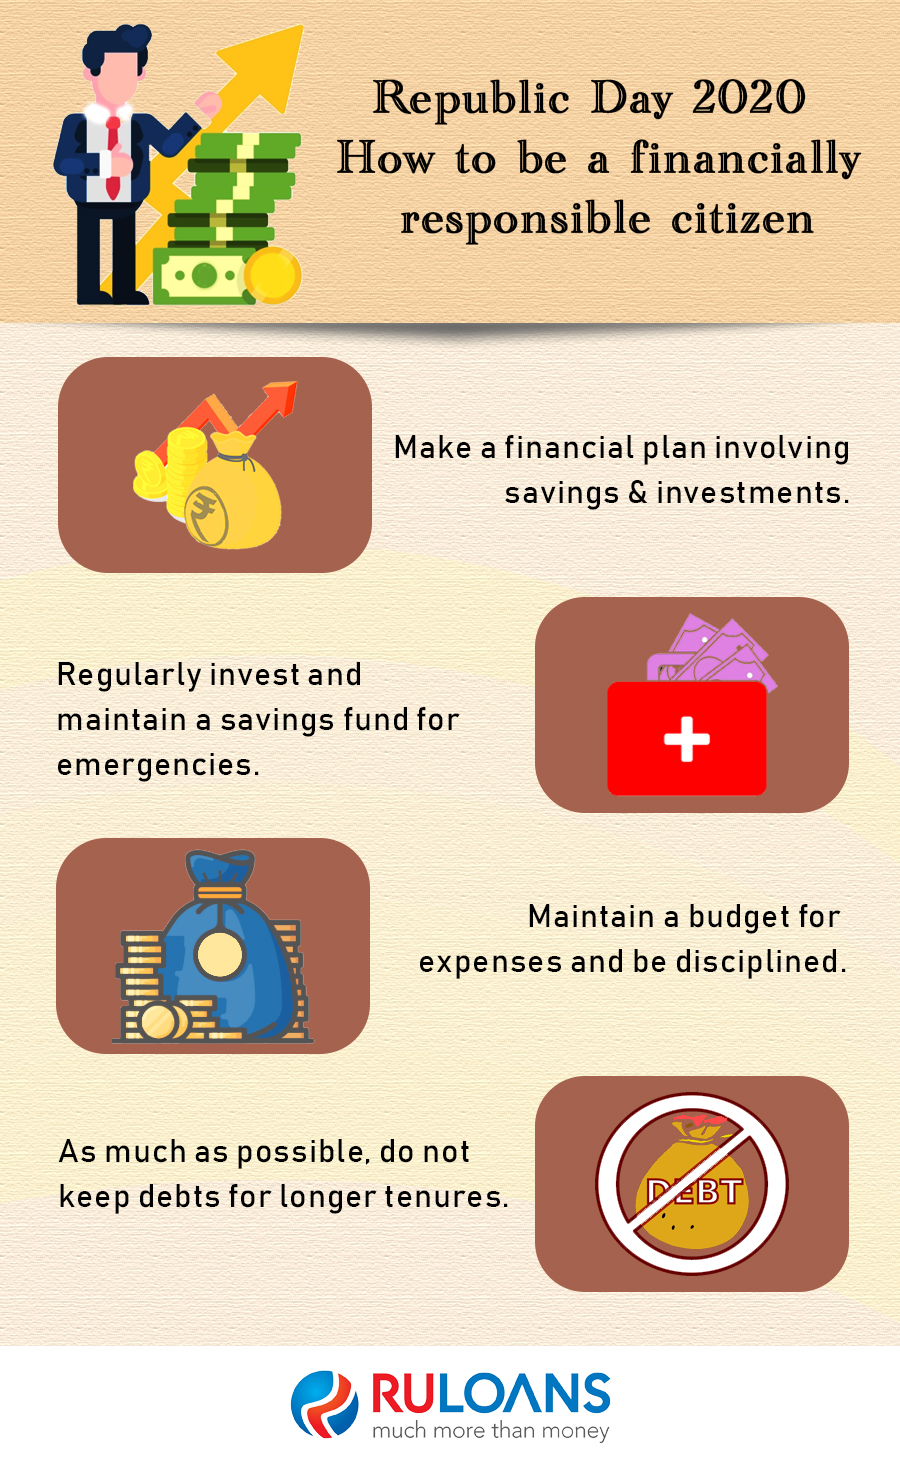 How to be a financially responsible citizen